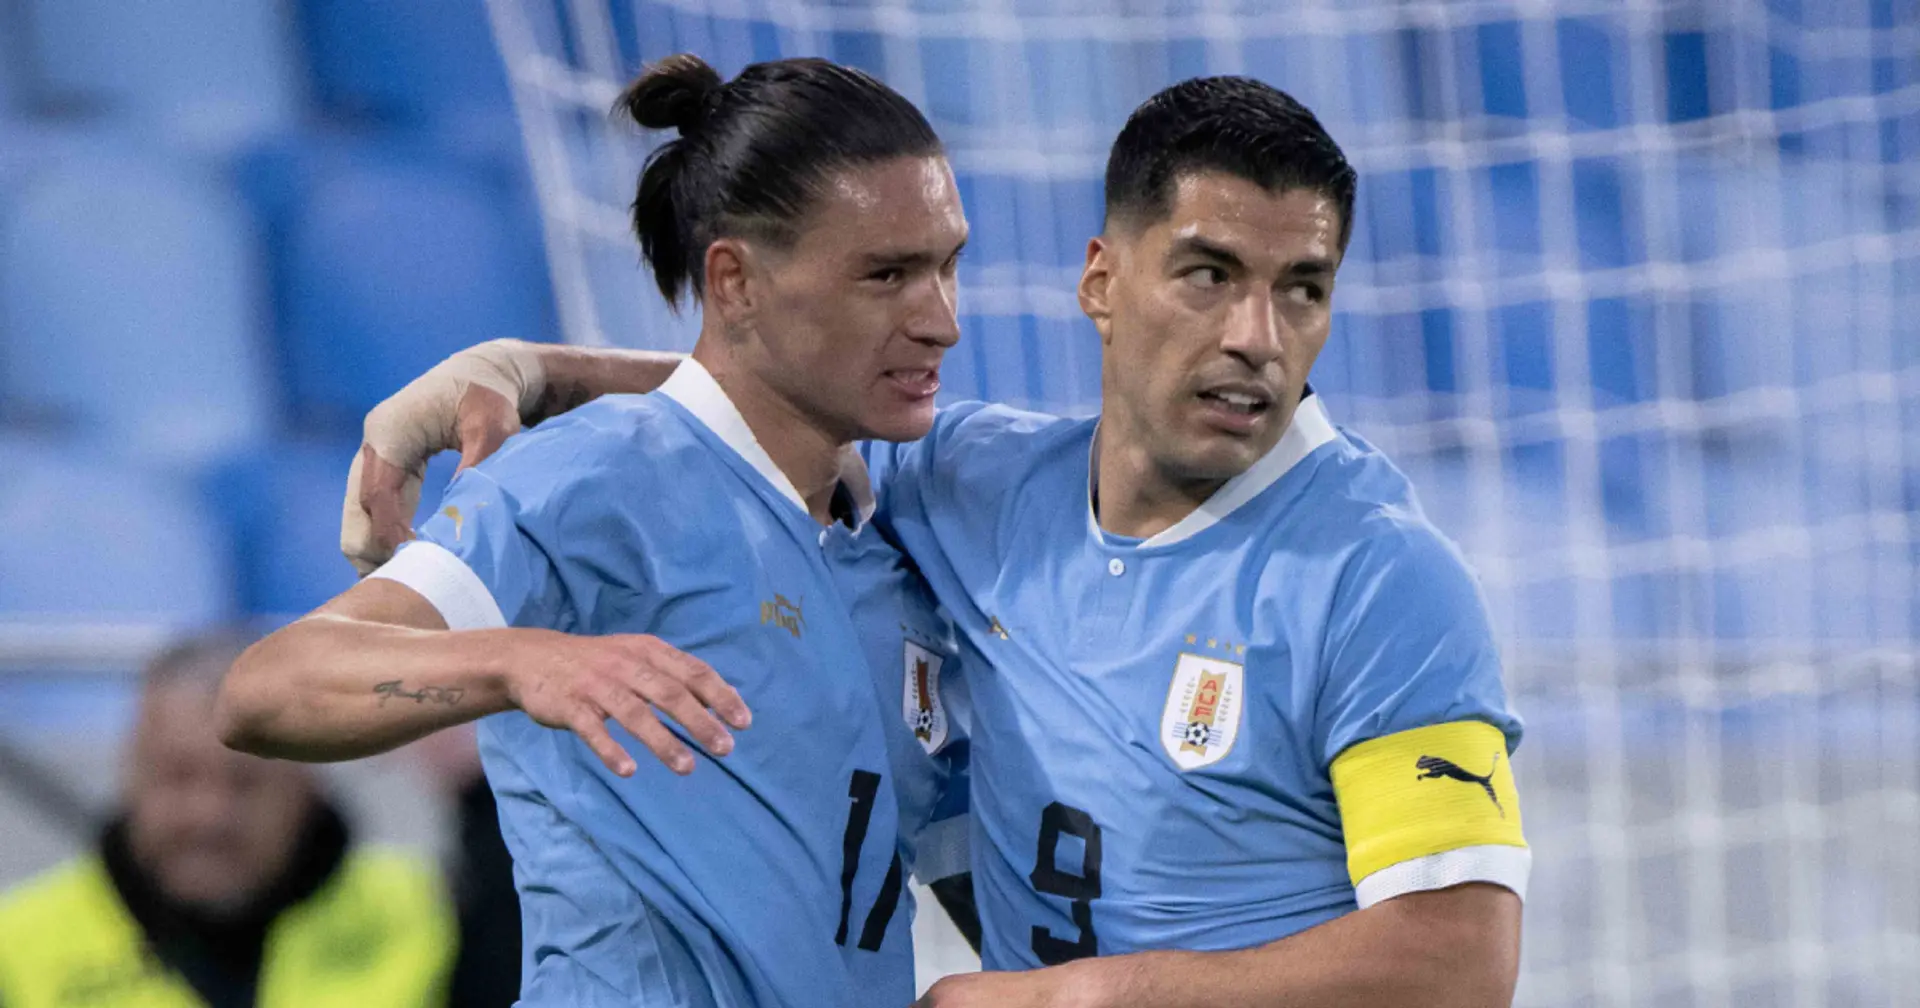 Darwin Nunez included in Uruguay squad for World Cup, Luis Suarez also in